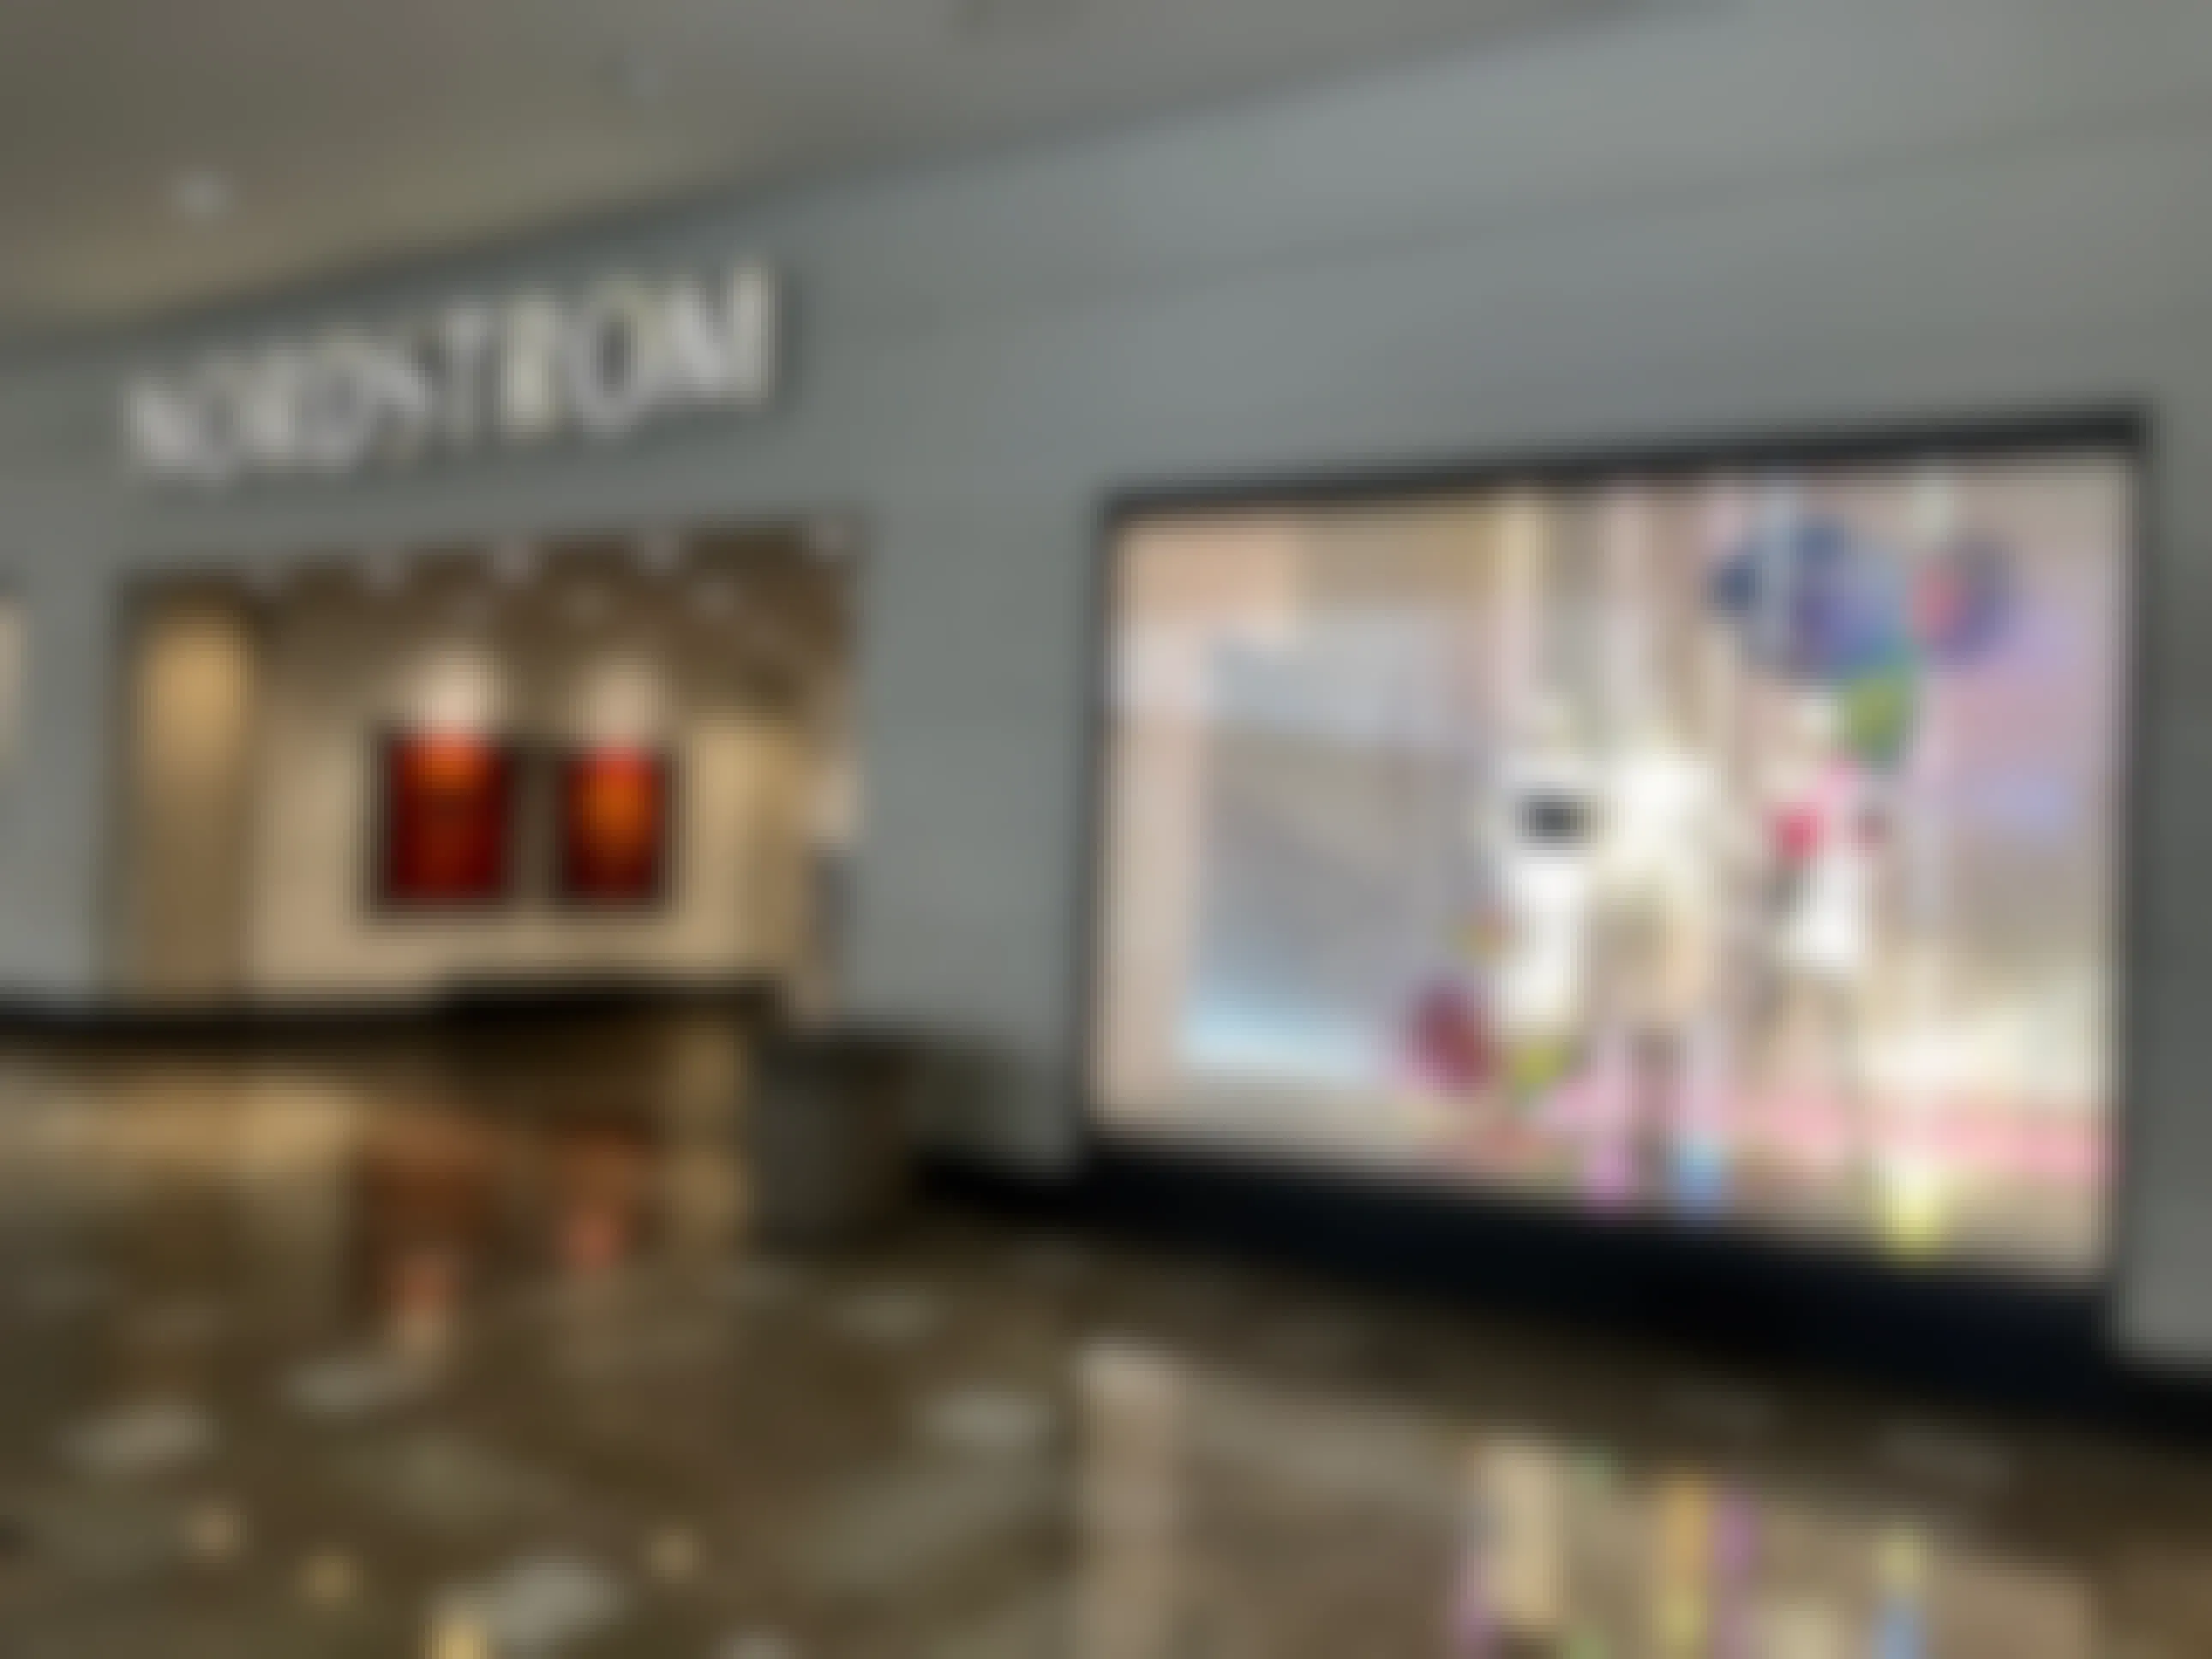 Nordstrom Closing 1 Out of 7 Stores